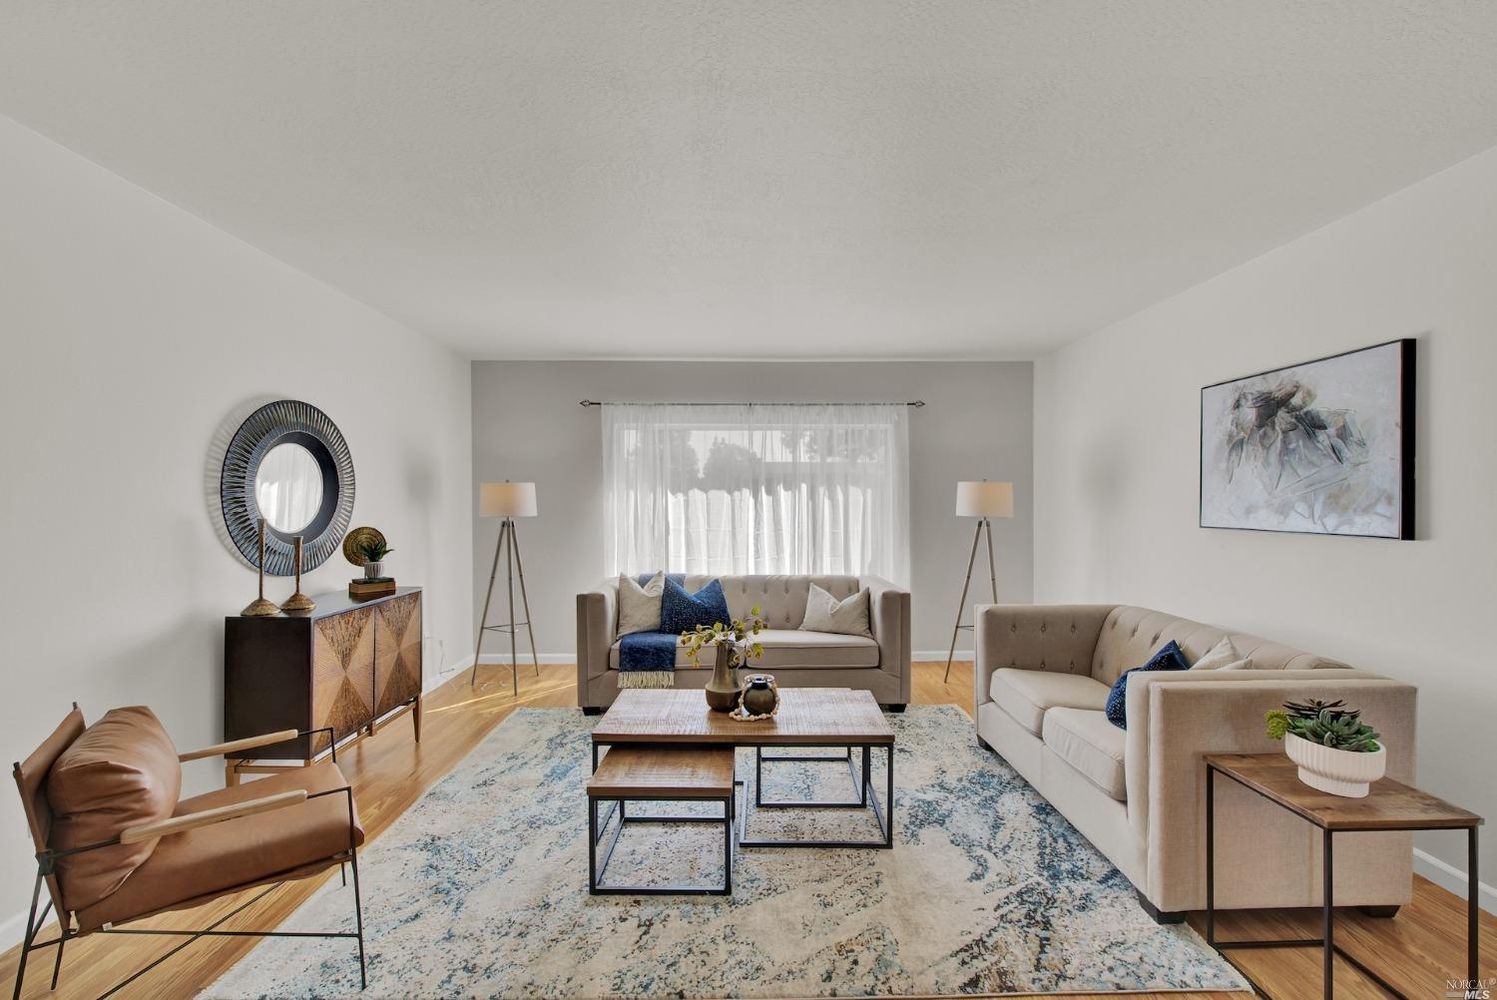 Living Room staging in Concord, California